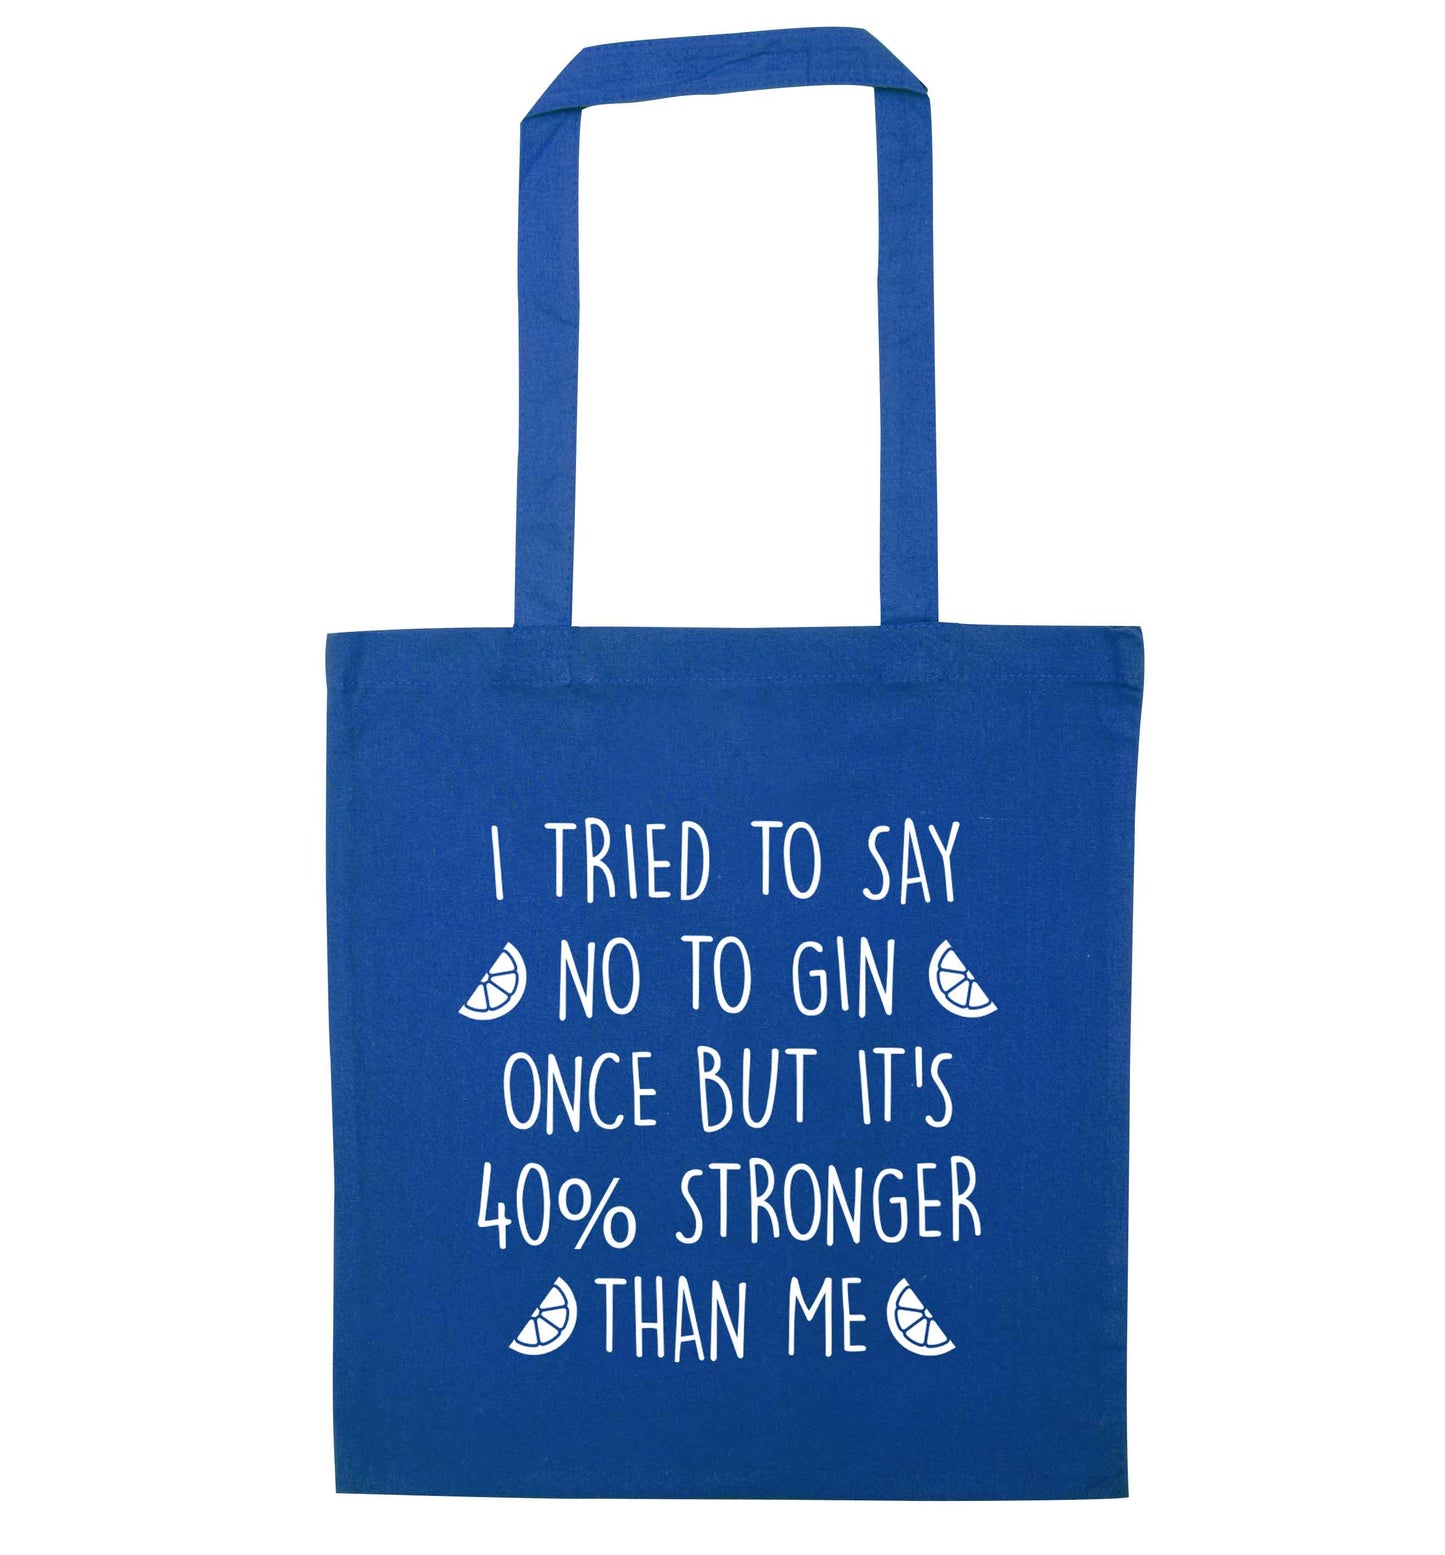 I tried to say no to gin once but it's 40% stronger than me blue tote bag